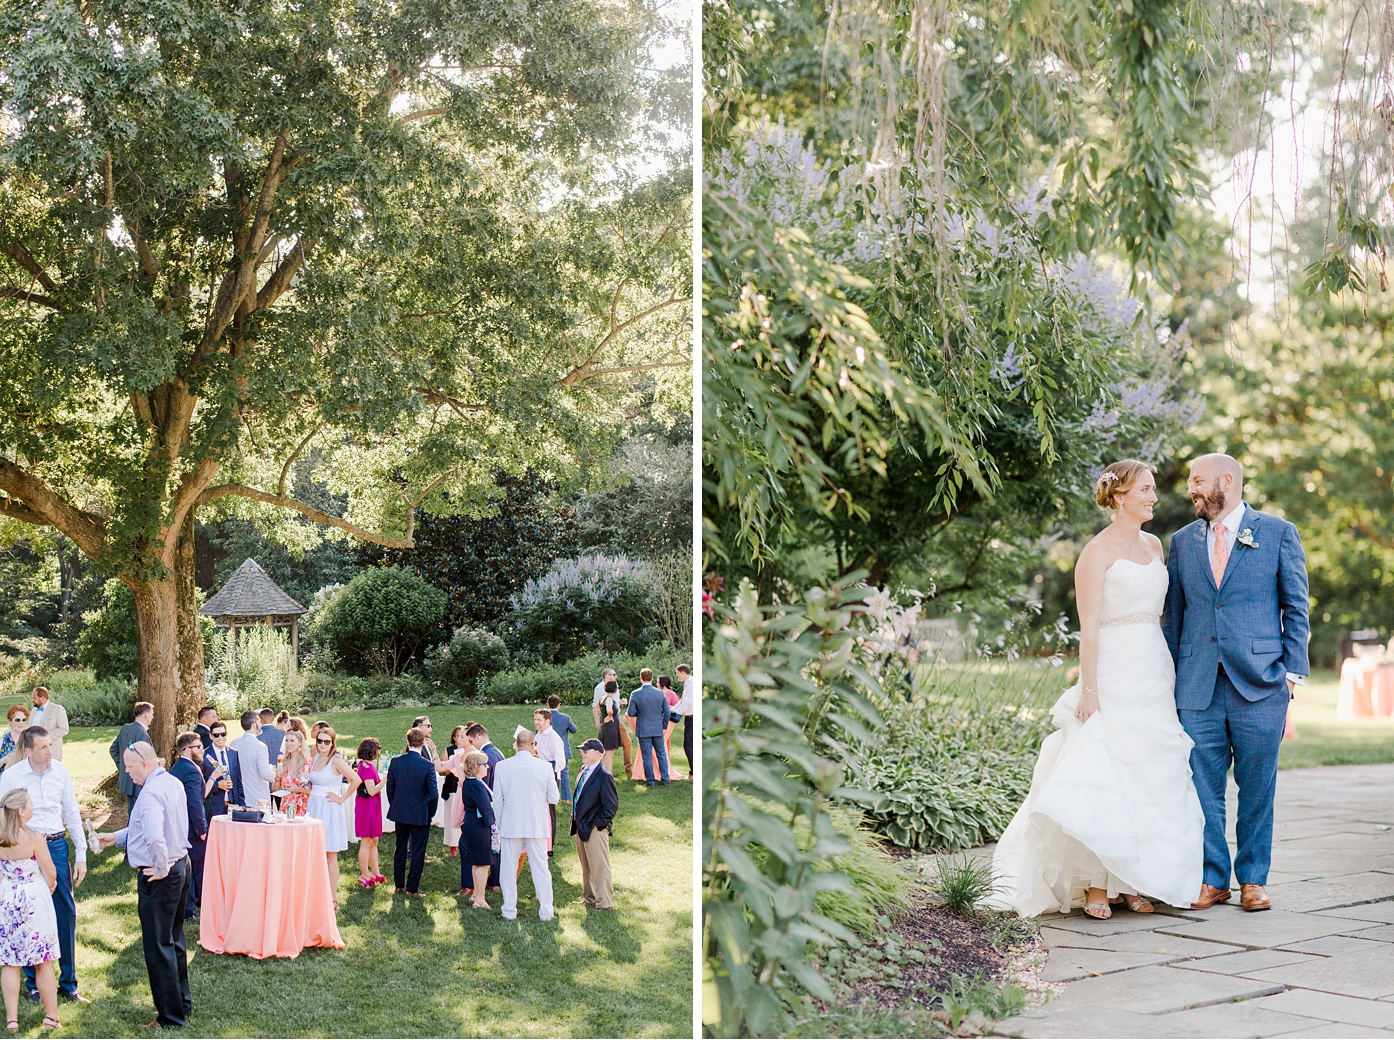 Historic London Town and Gardens Wedding